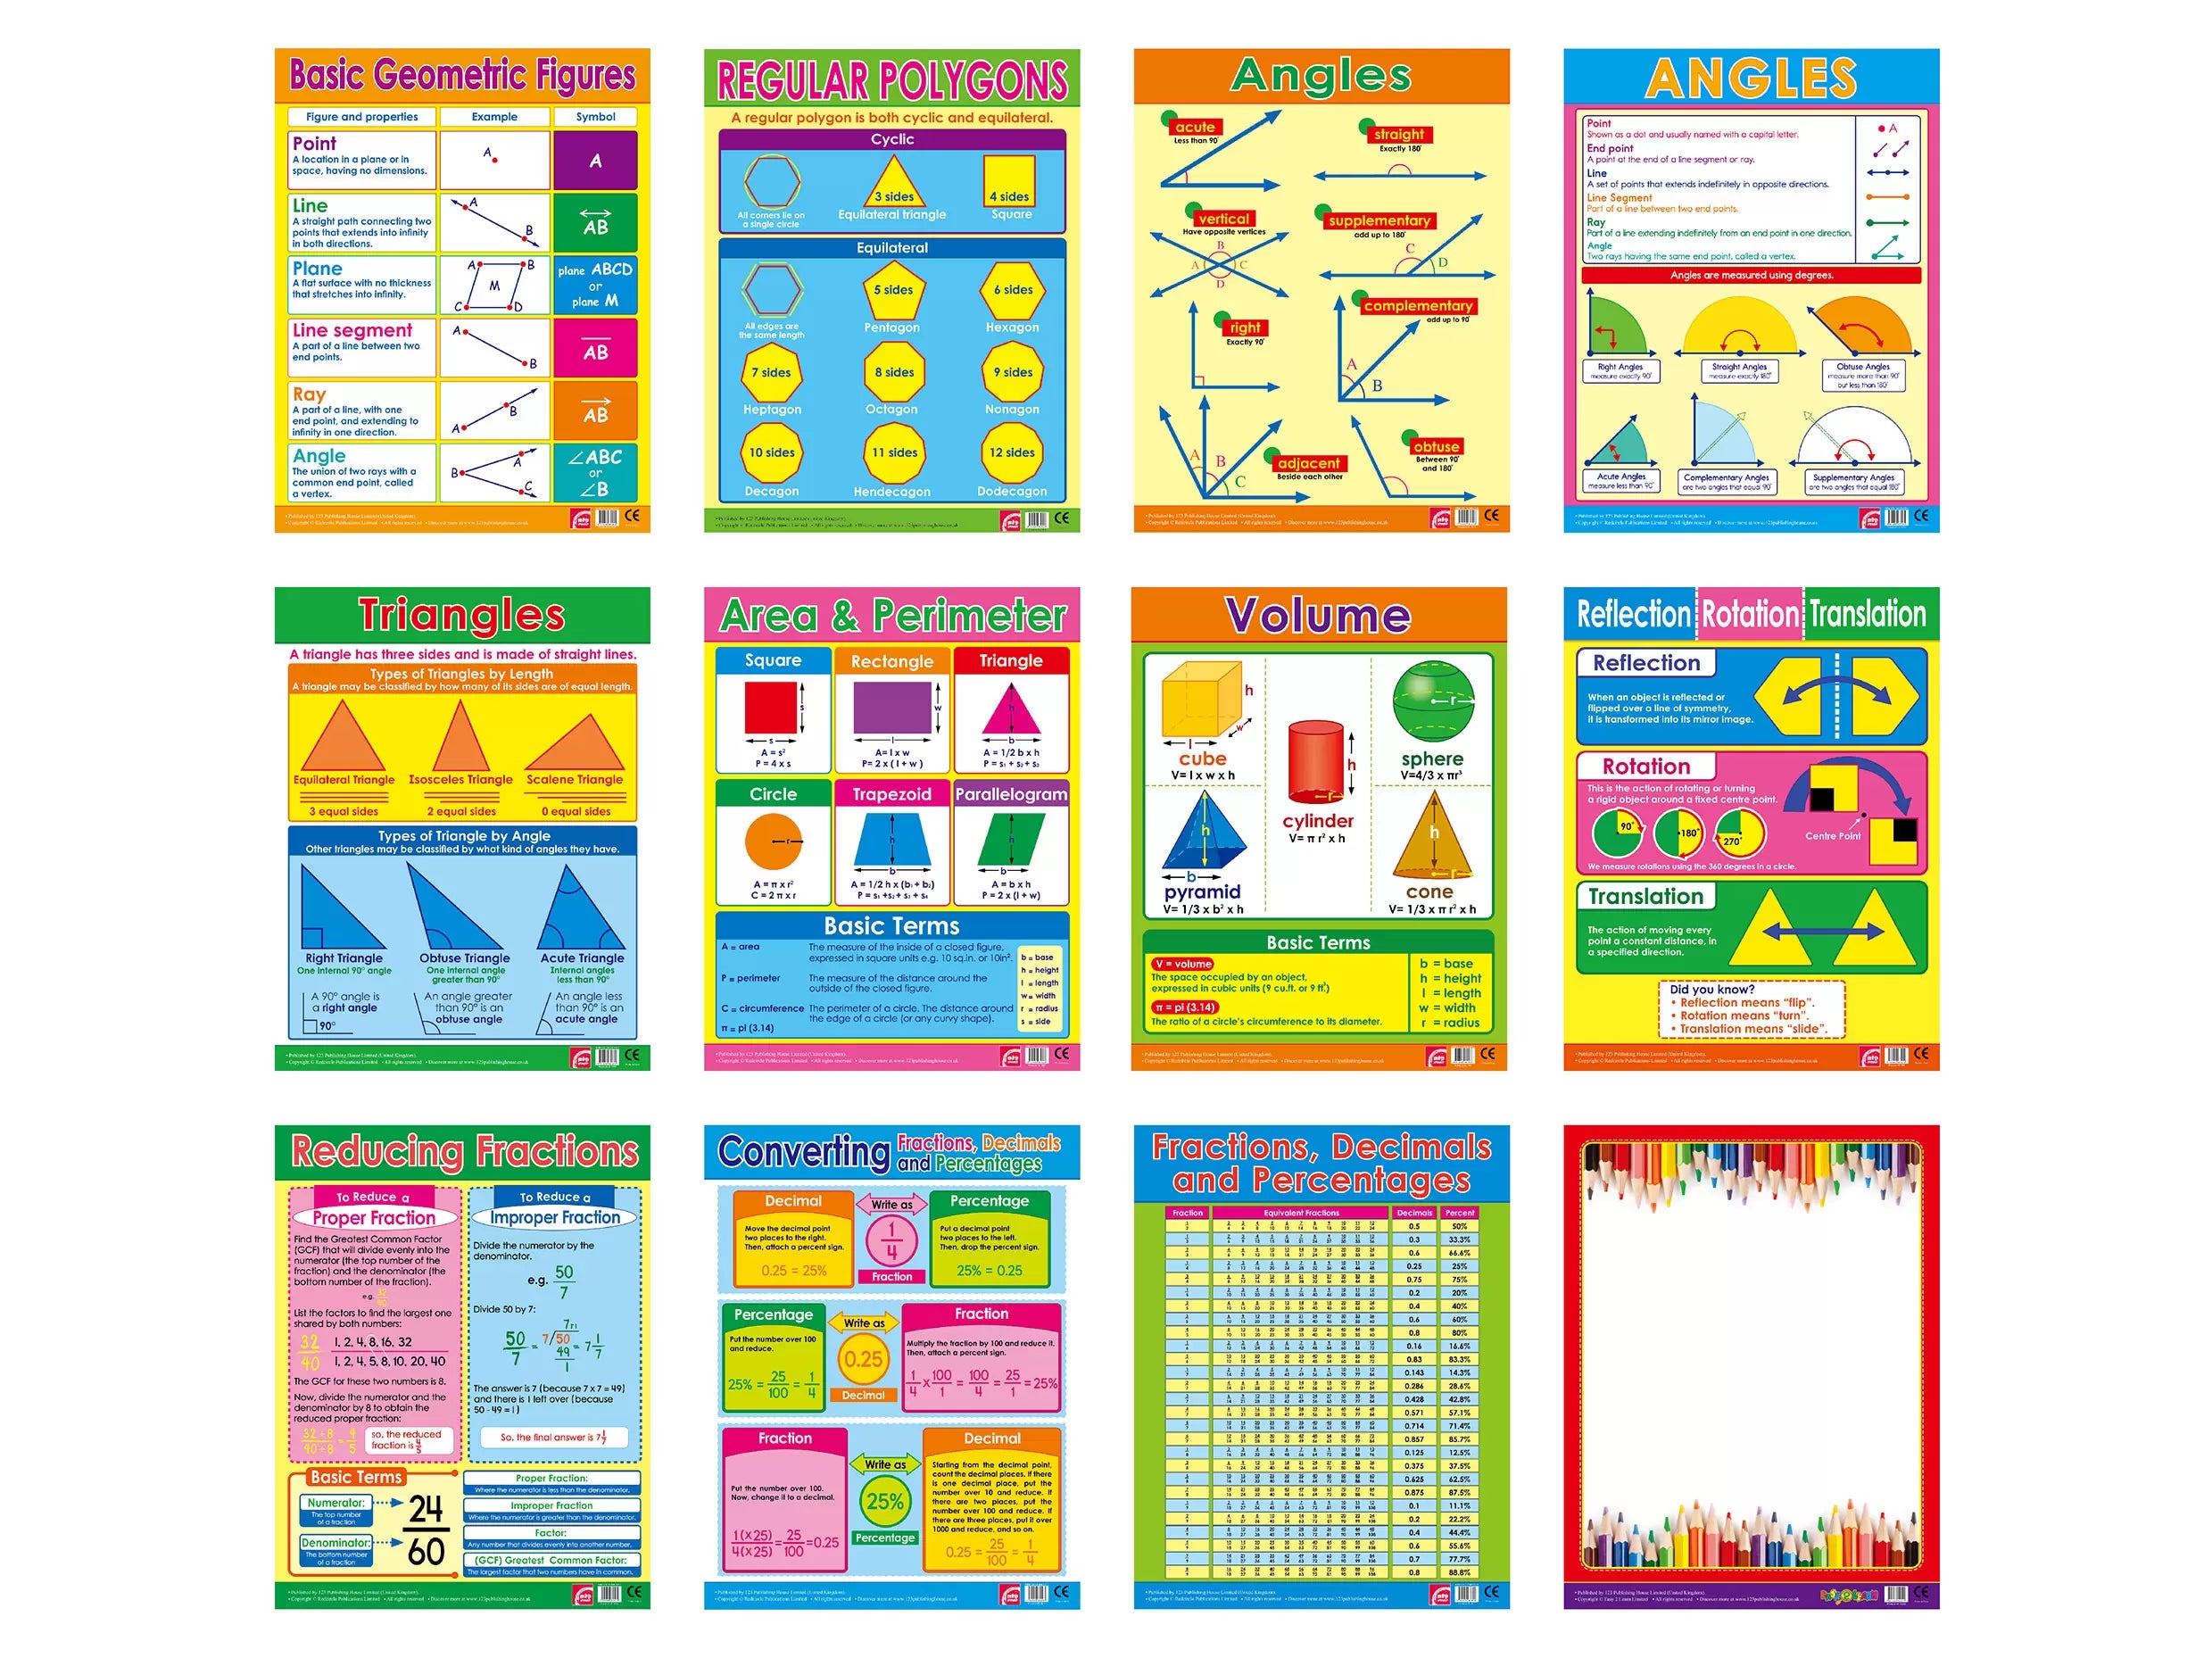 Geometry, Fractions, Decimals and Percent (12 Wall Charts) - Educational Wall Chart Pack in English